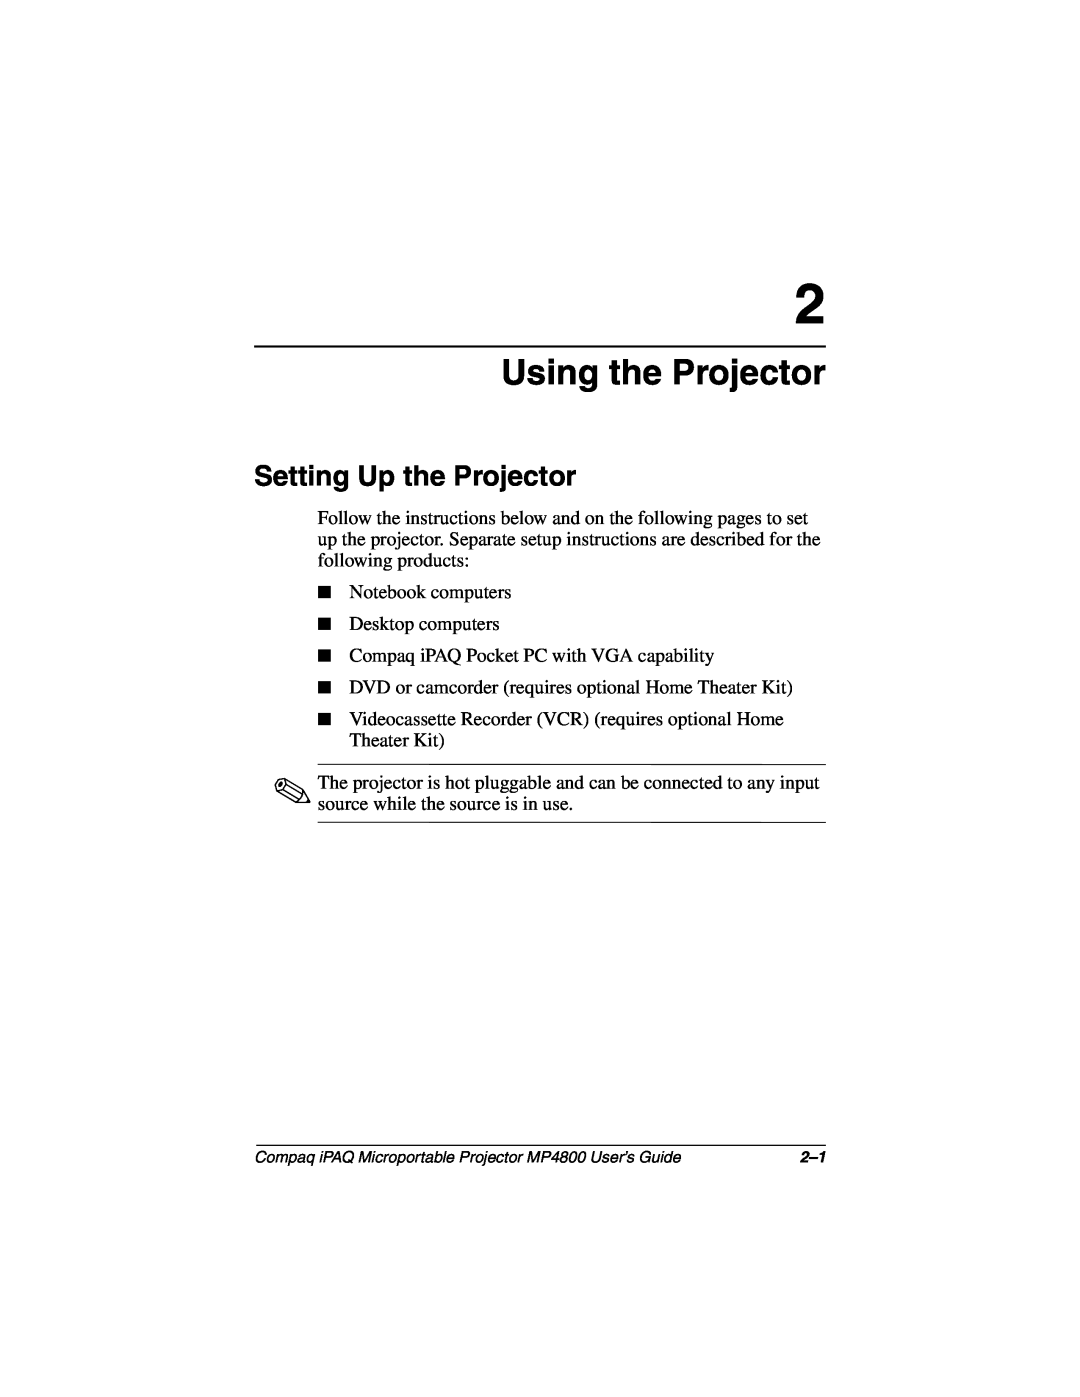 Compaq MP4800 manual Using the Projector, Setting Up the Projector 